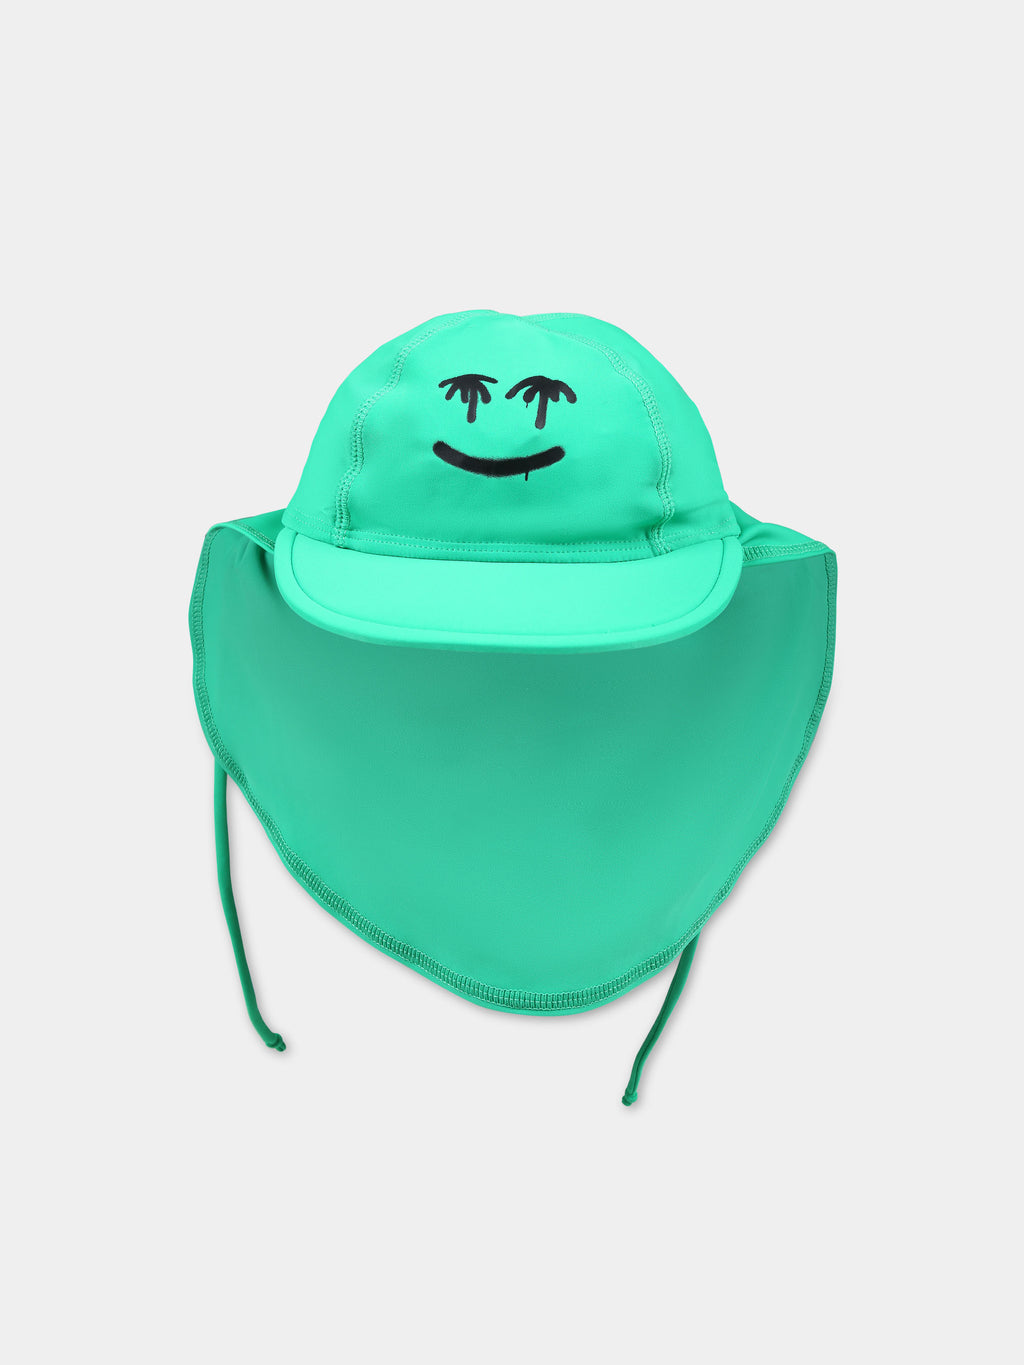 Green hat for kids with smiley